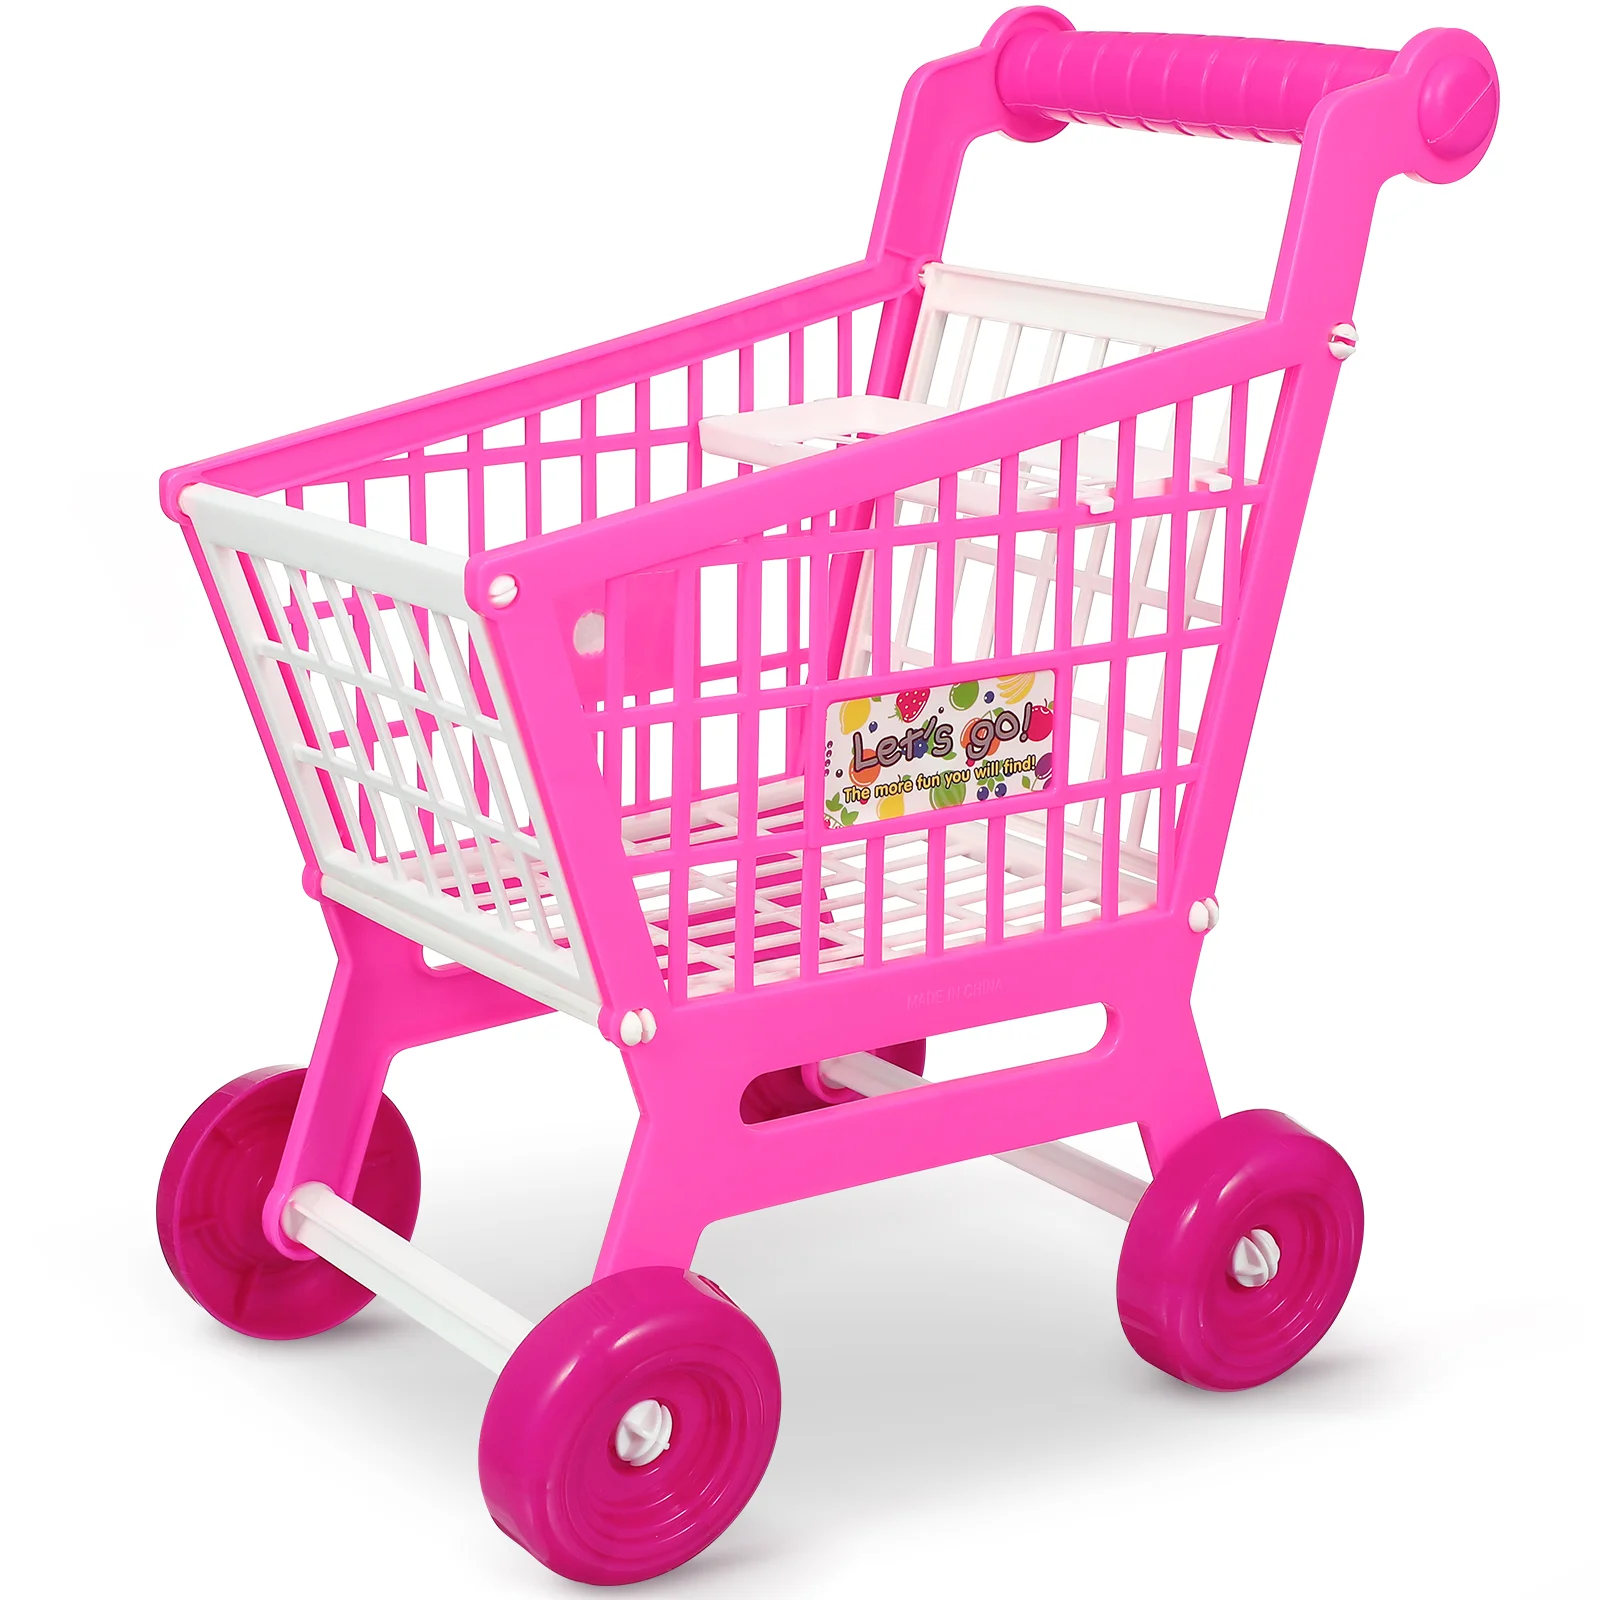 

Shopping Cart Toy for Kids Simulation Mini Supermarket Shopping Trolley for Toddlers